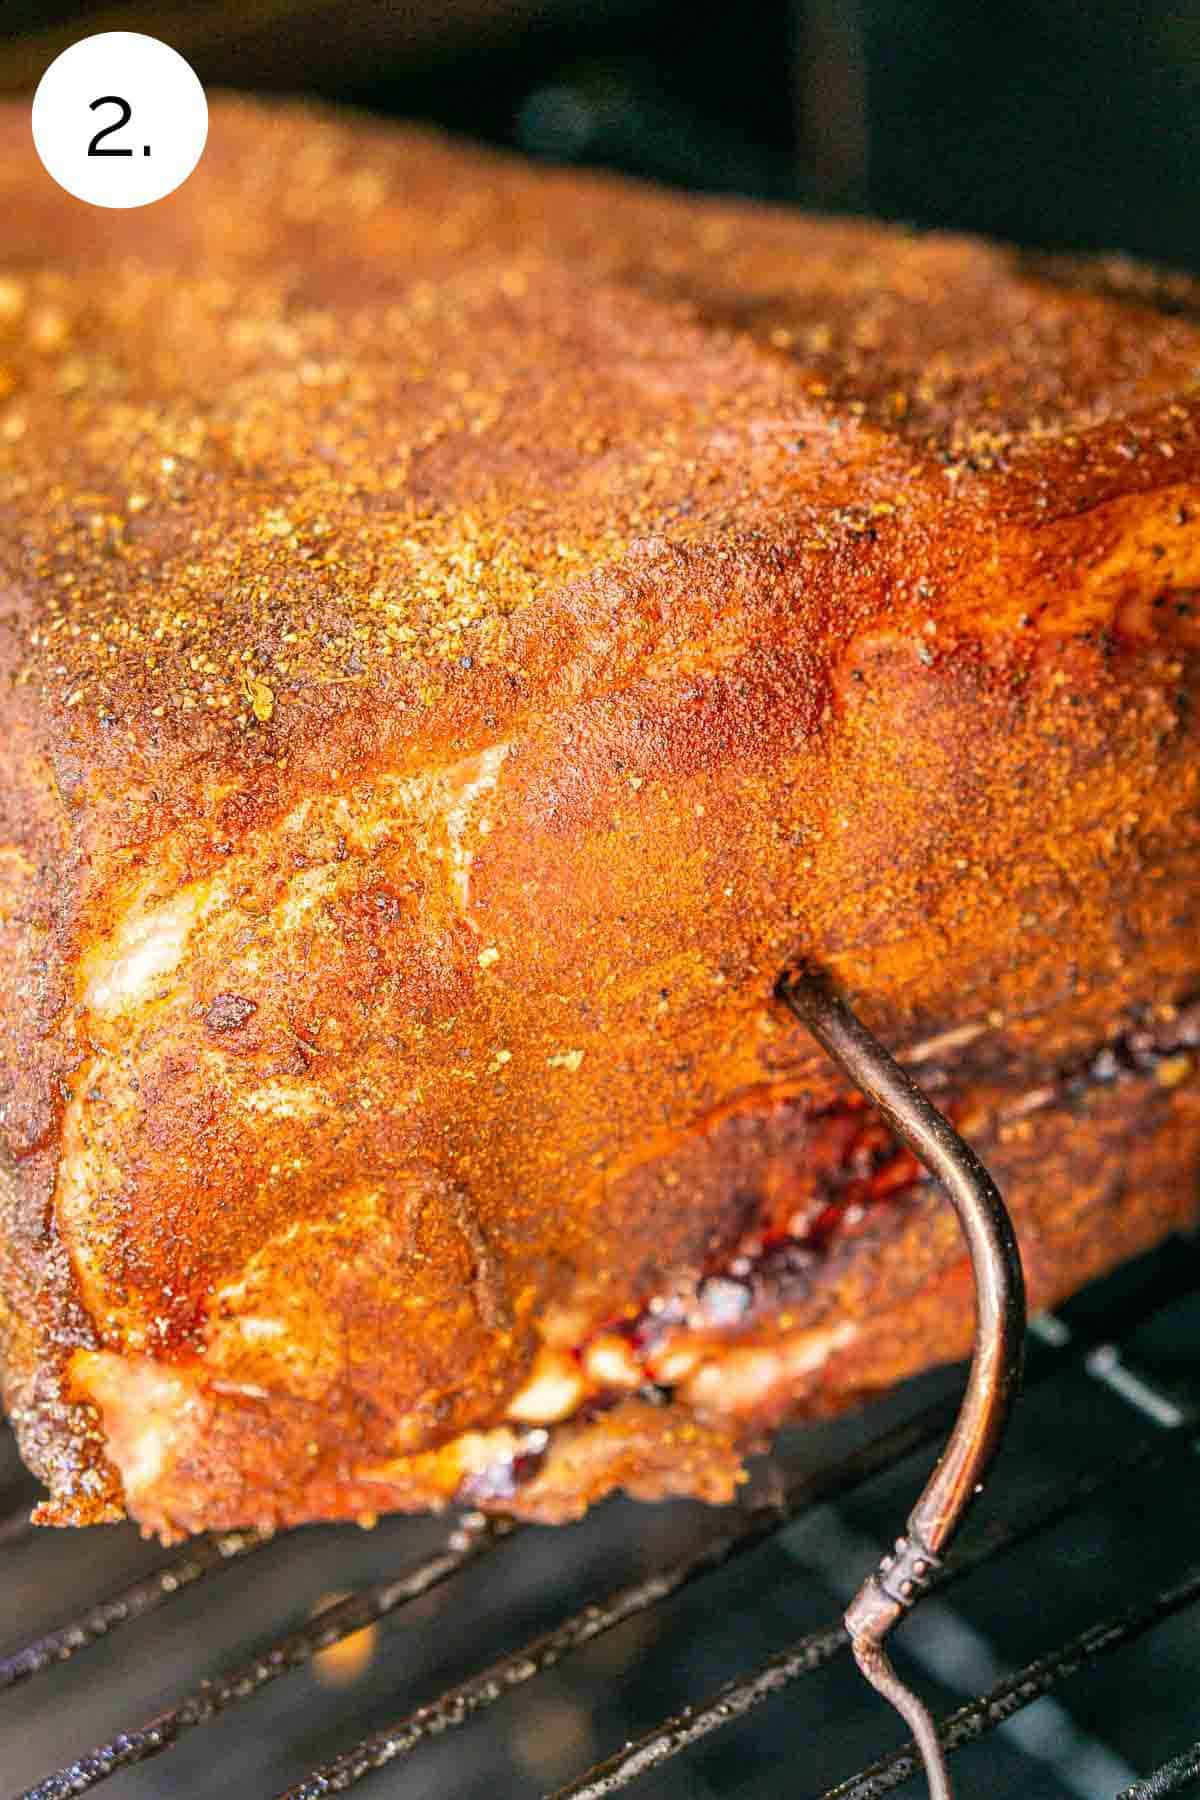 The seasoned pork butt on the grates of the smoker with a leave-in meat thermometer inserted in the center of the roast.